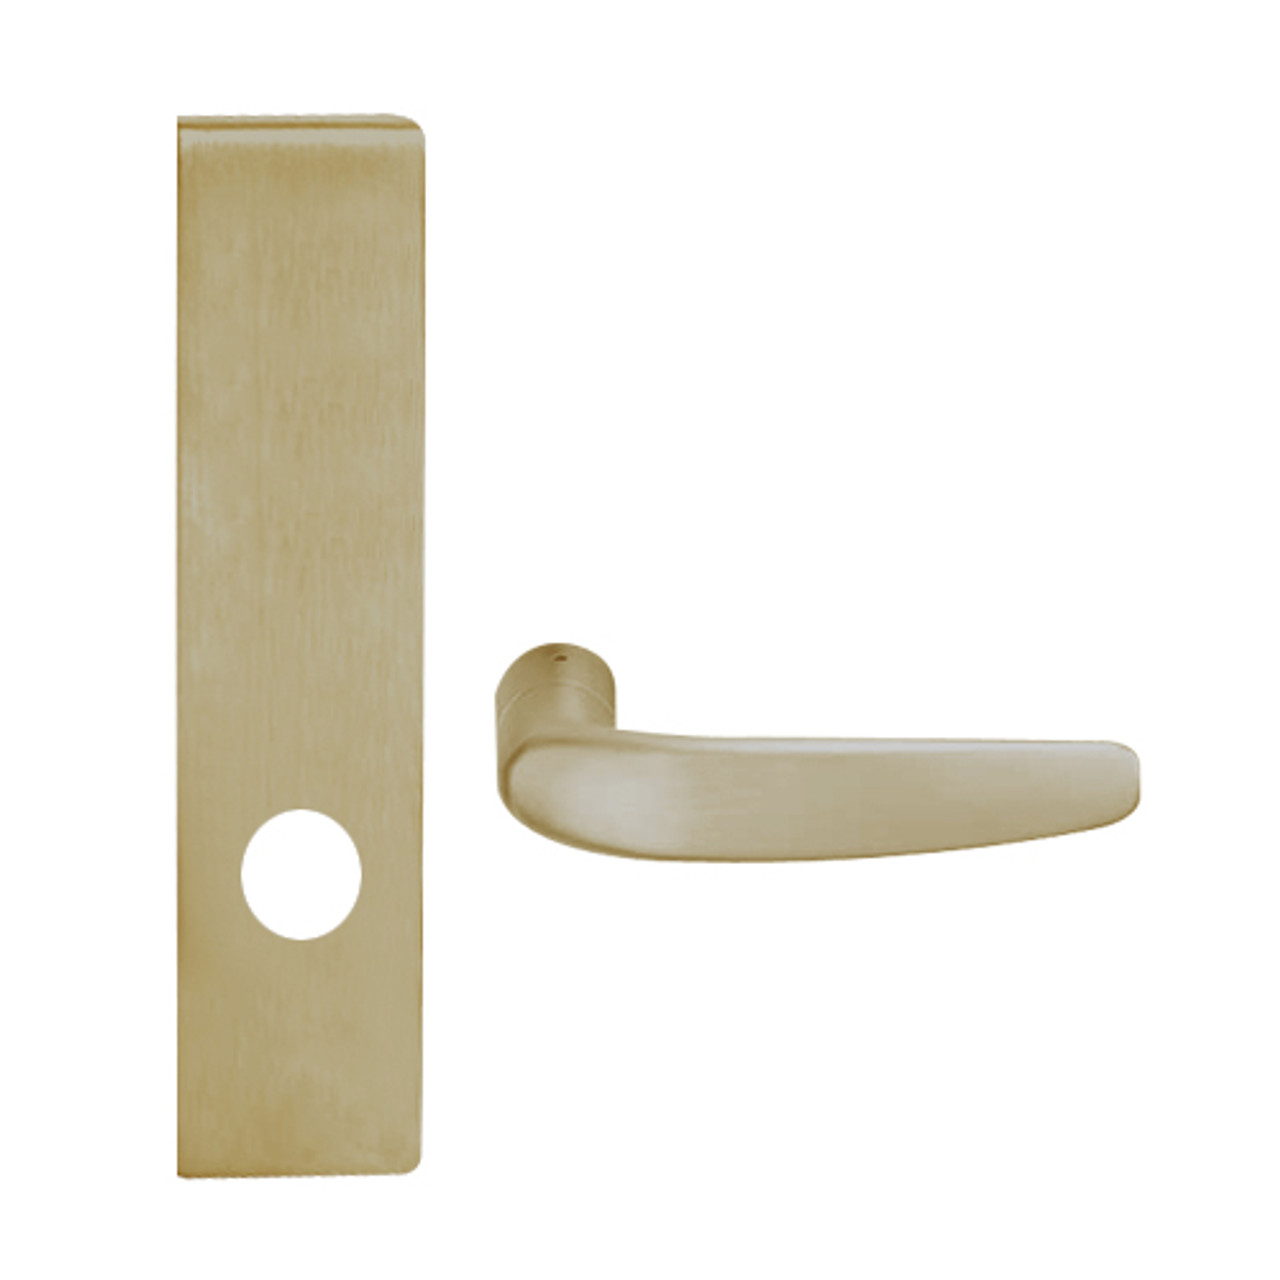 L9010-07L-612 Schlage L Series Passage Latch Commercial Mortise Lock with 07 Cast Lever Design in Satin Bronze